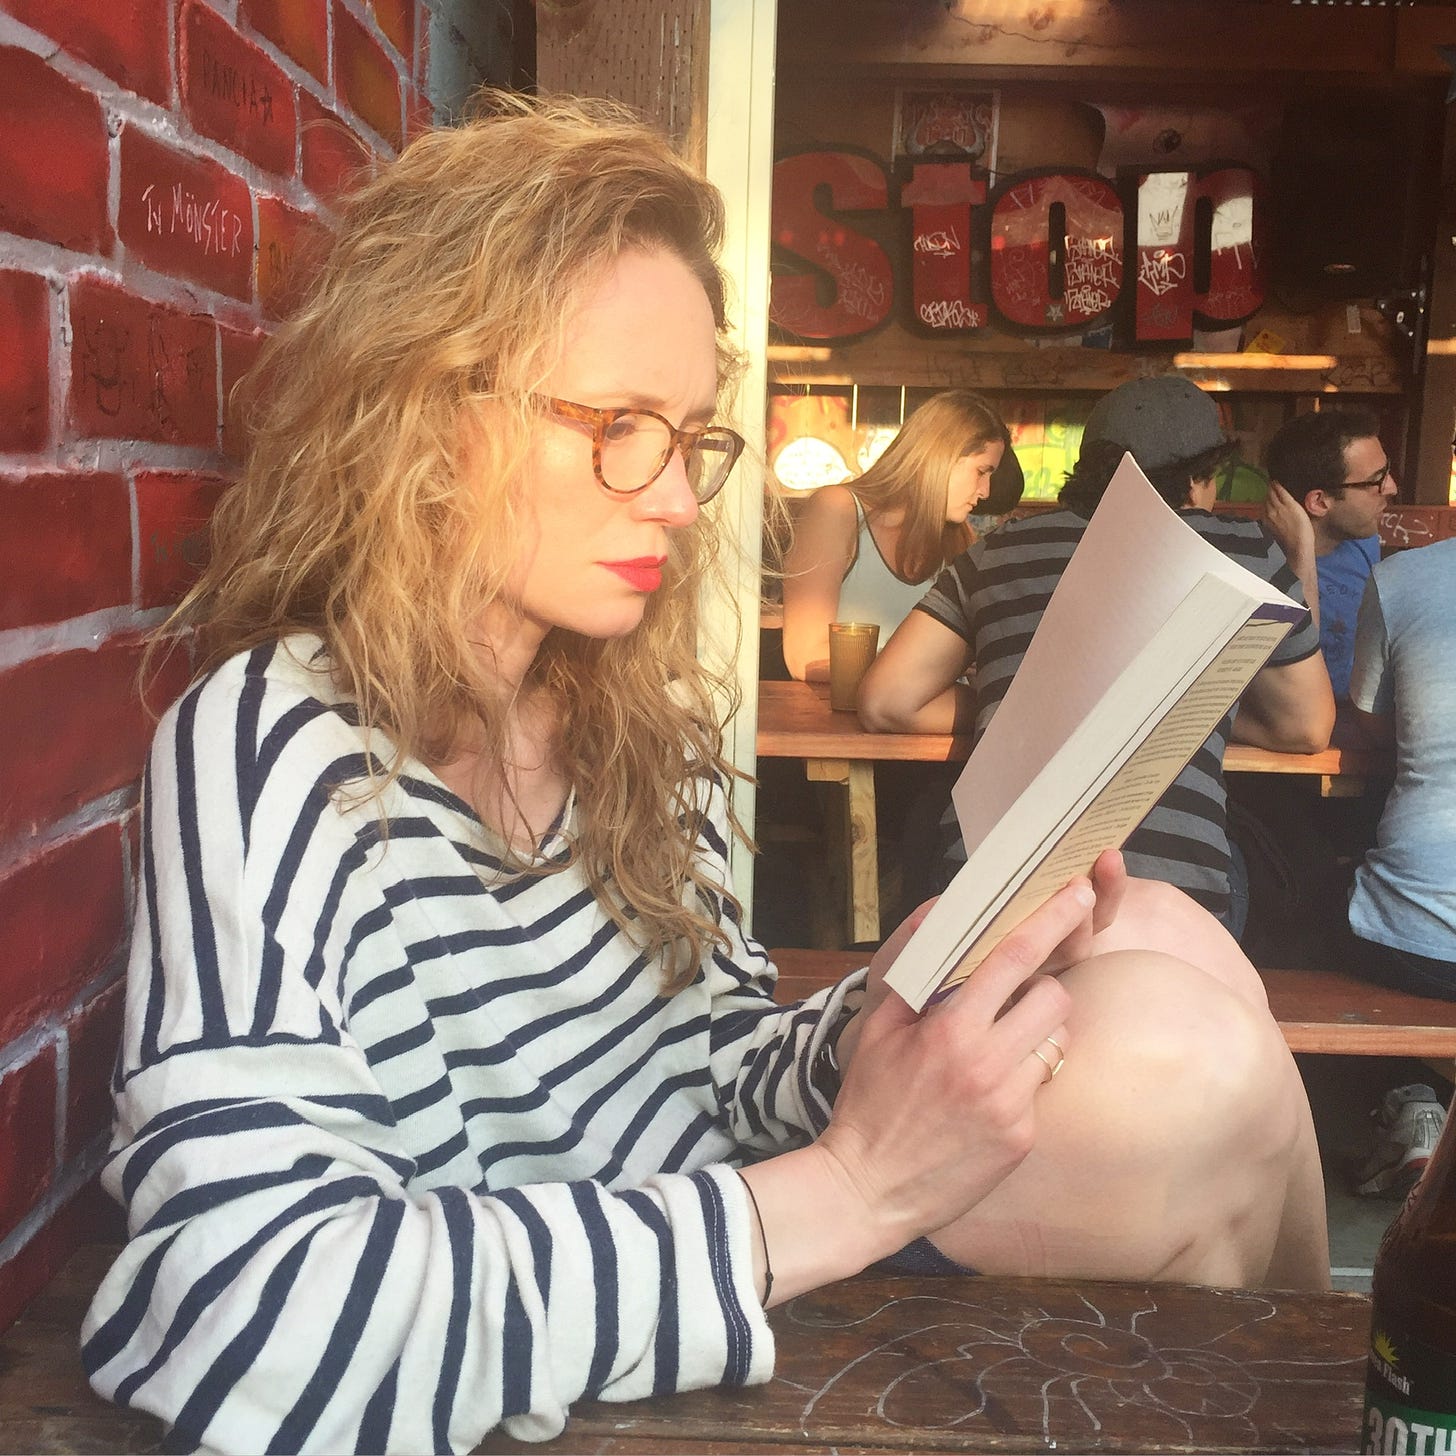 A white woman with glasses and long hair reads a book at a bar